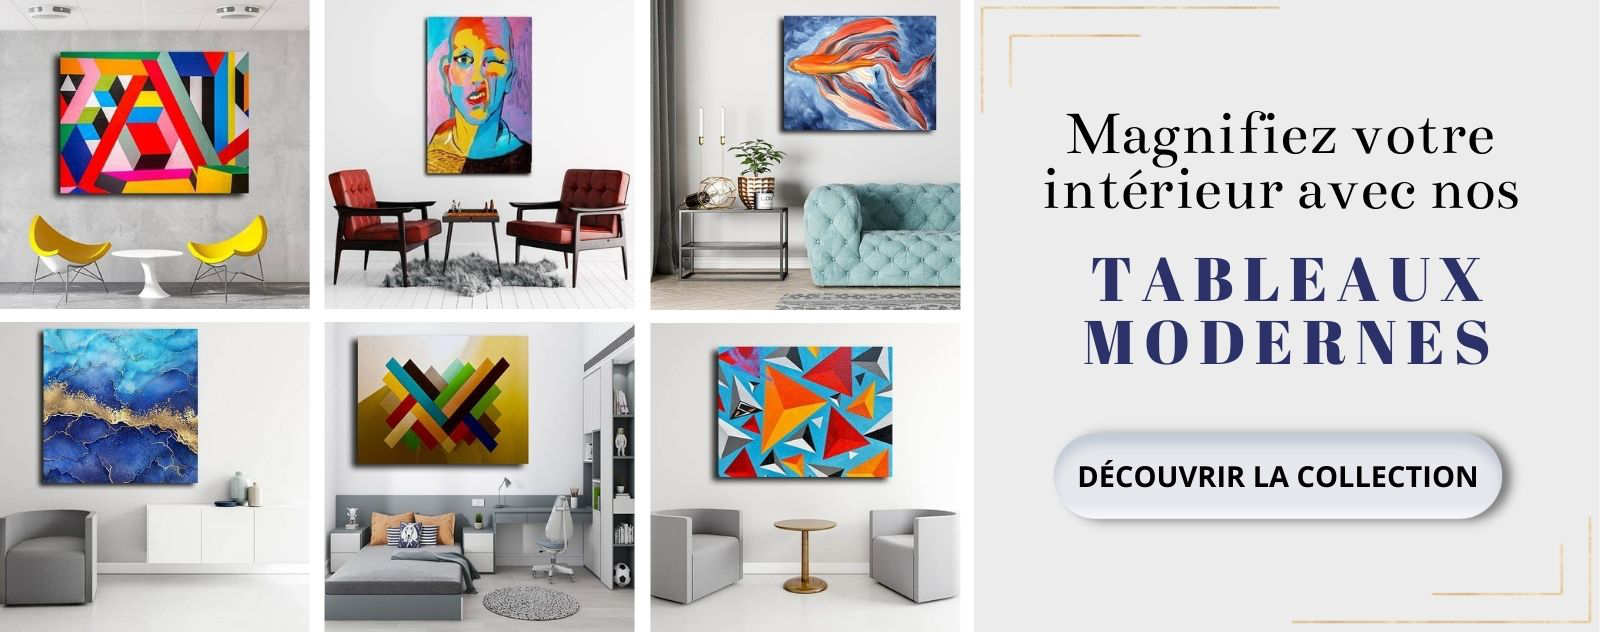 Tableau Moderne Collection